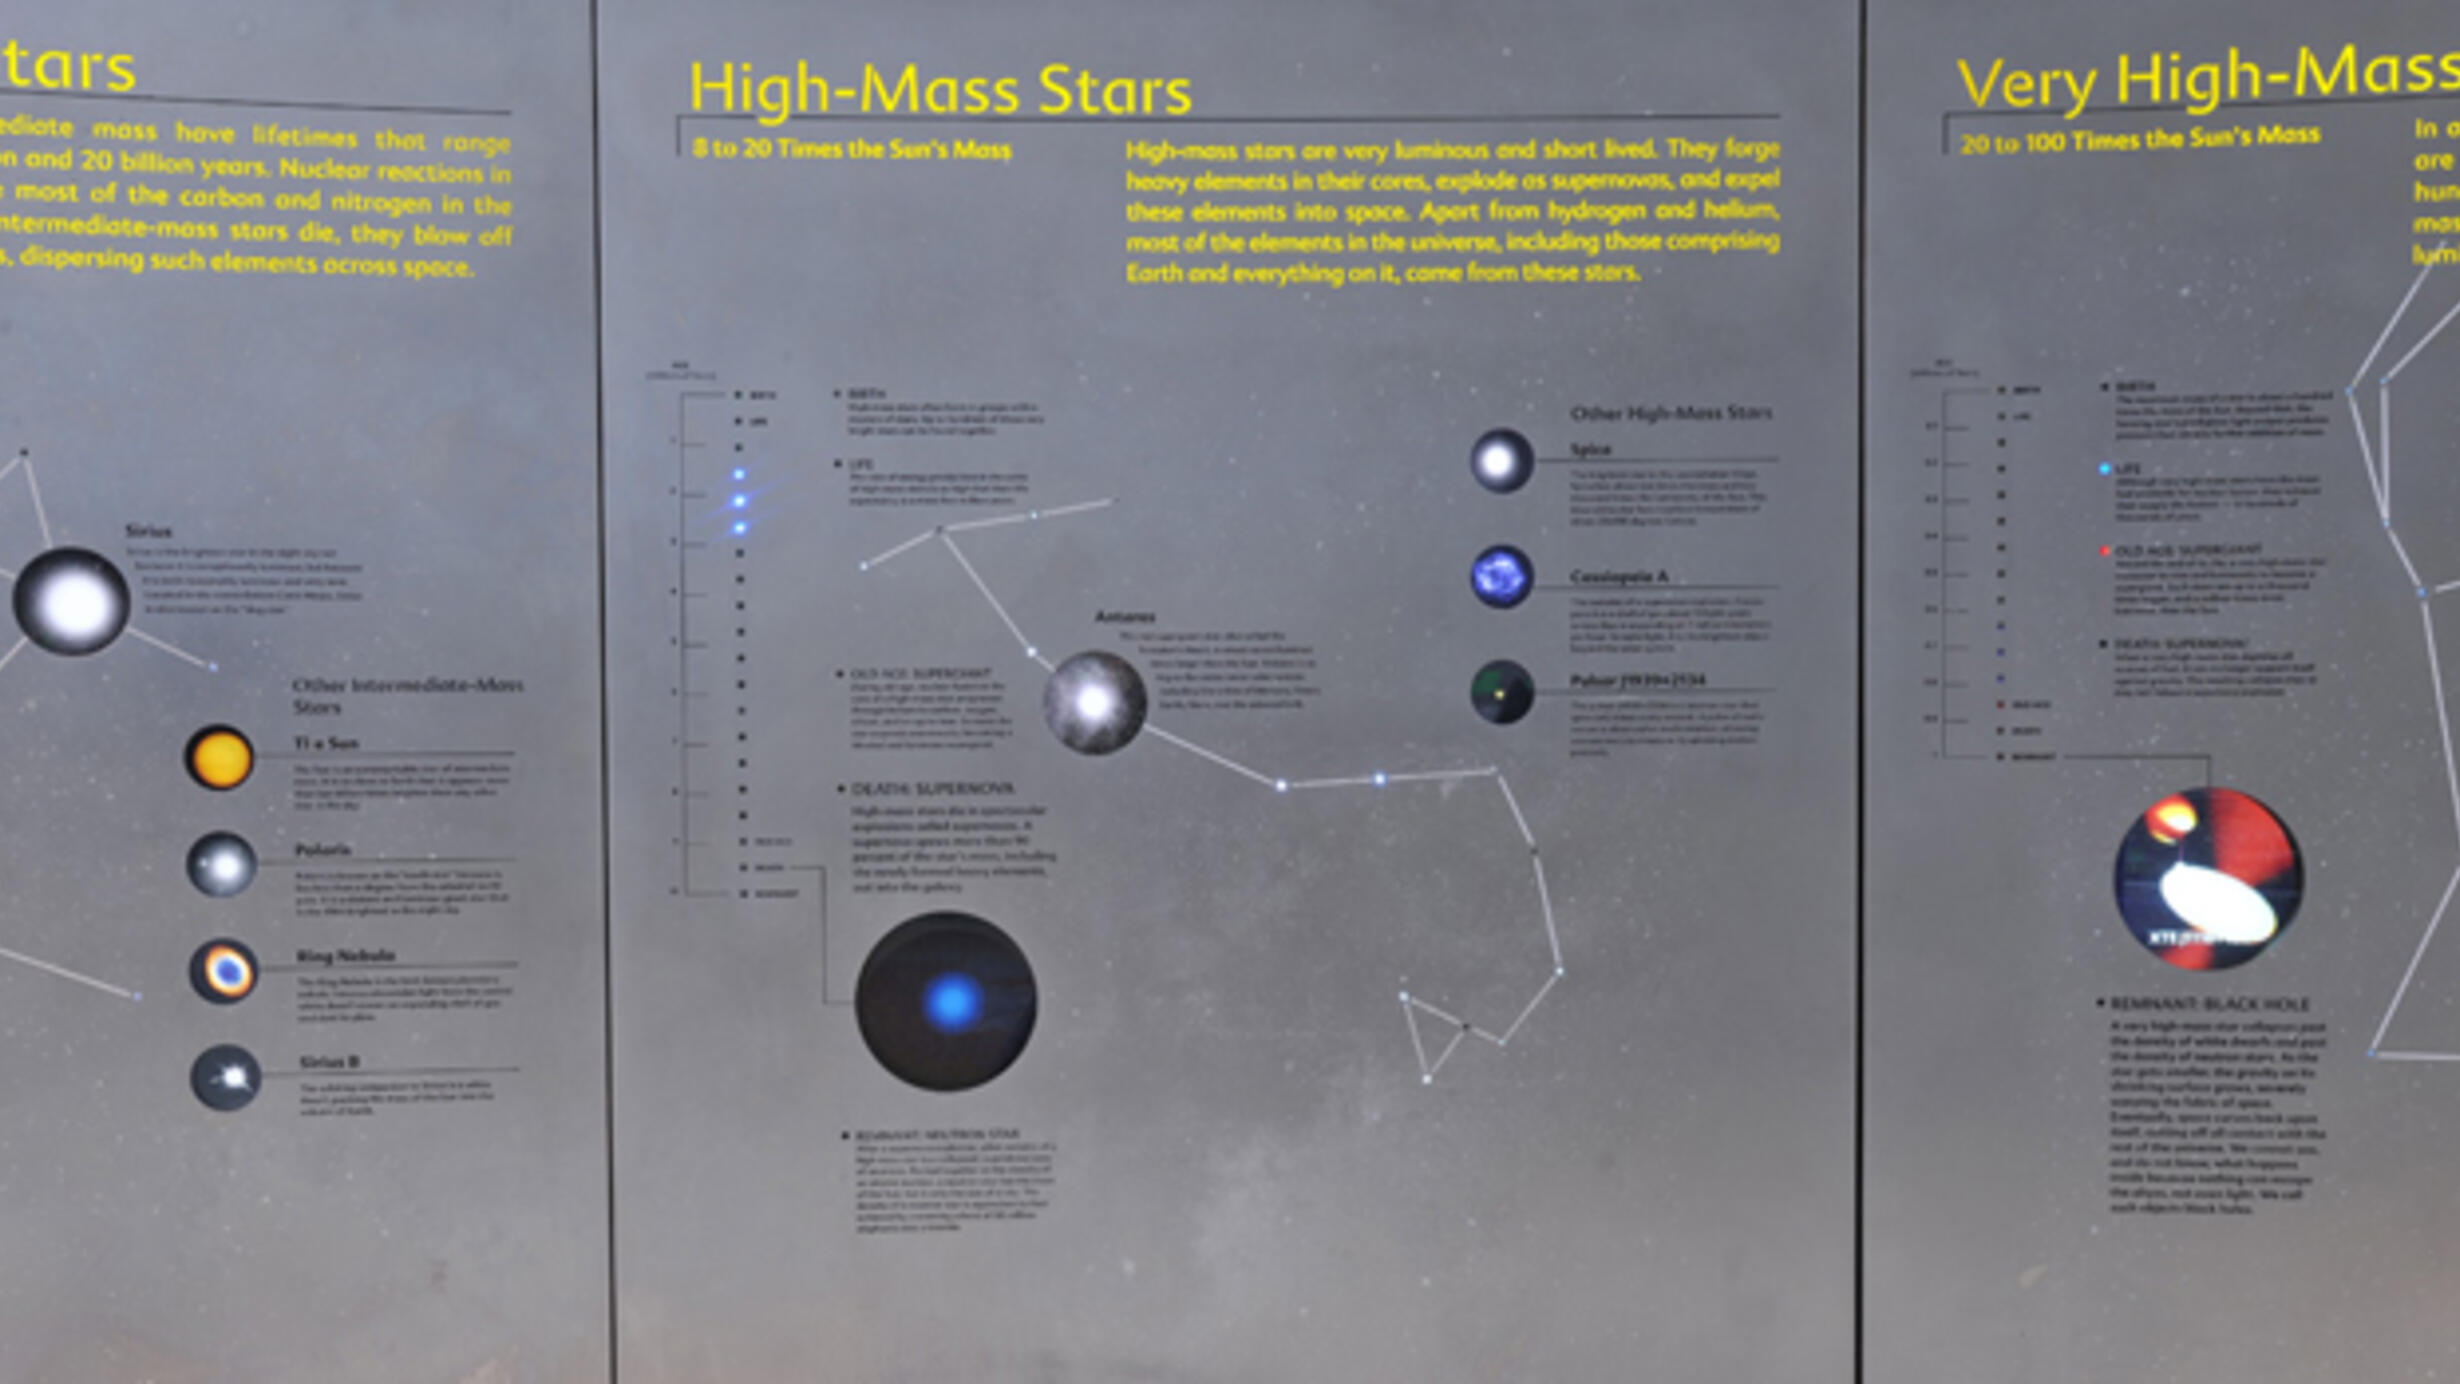 In the Hall of the Universe in the Museum’s Rose Hall for Earth and Space, an exhibition panel with images and text about high-mass stars.